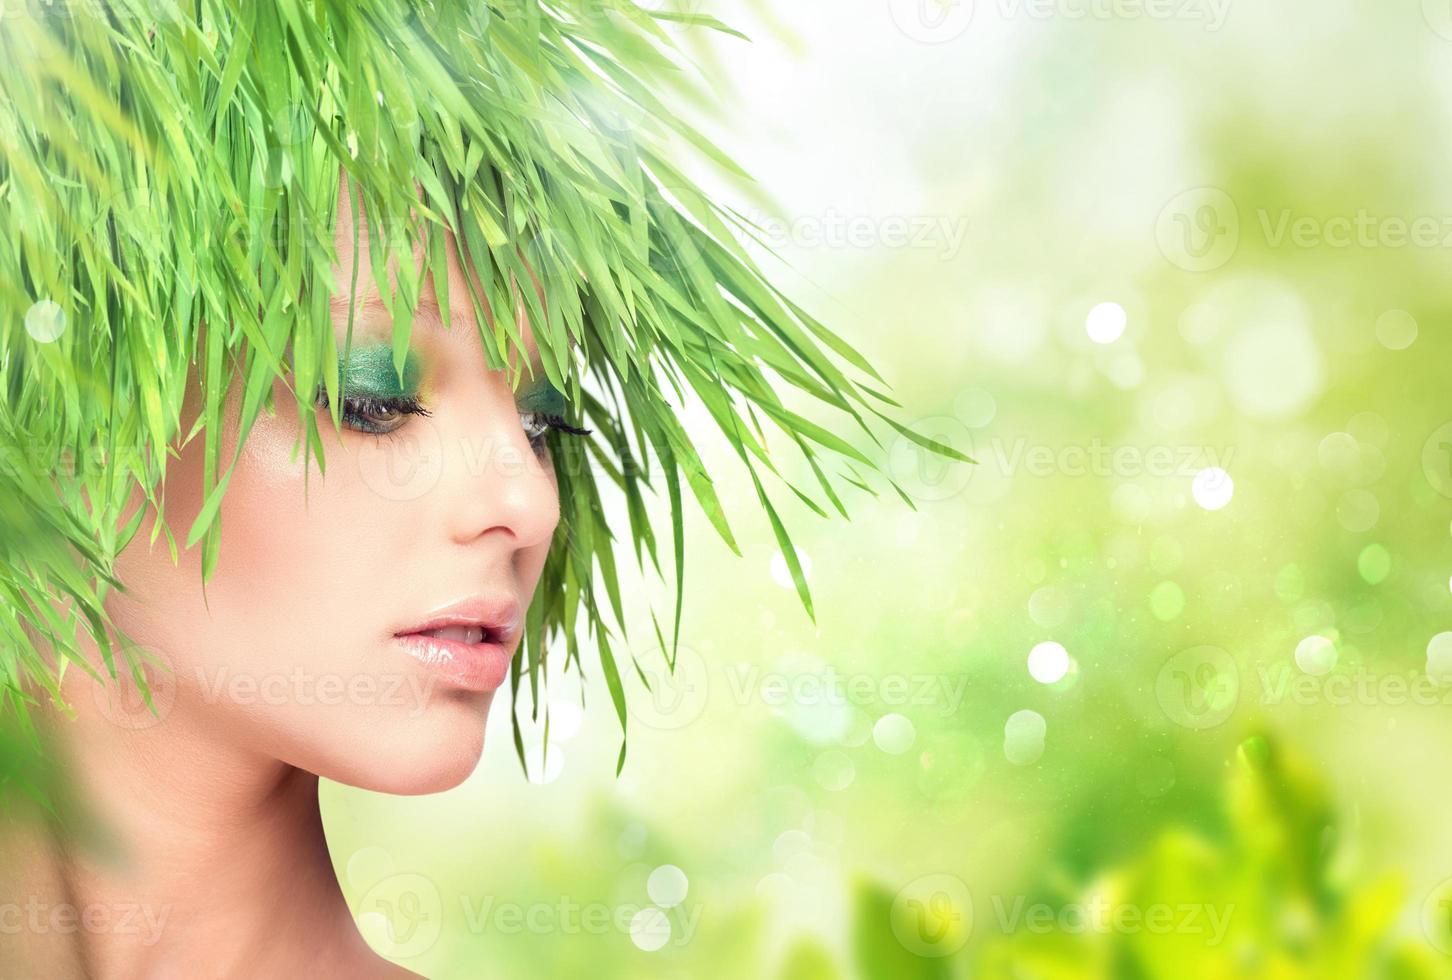 Nature beauty woman with fresh grass hair photo